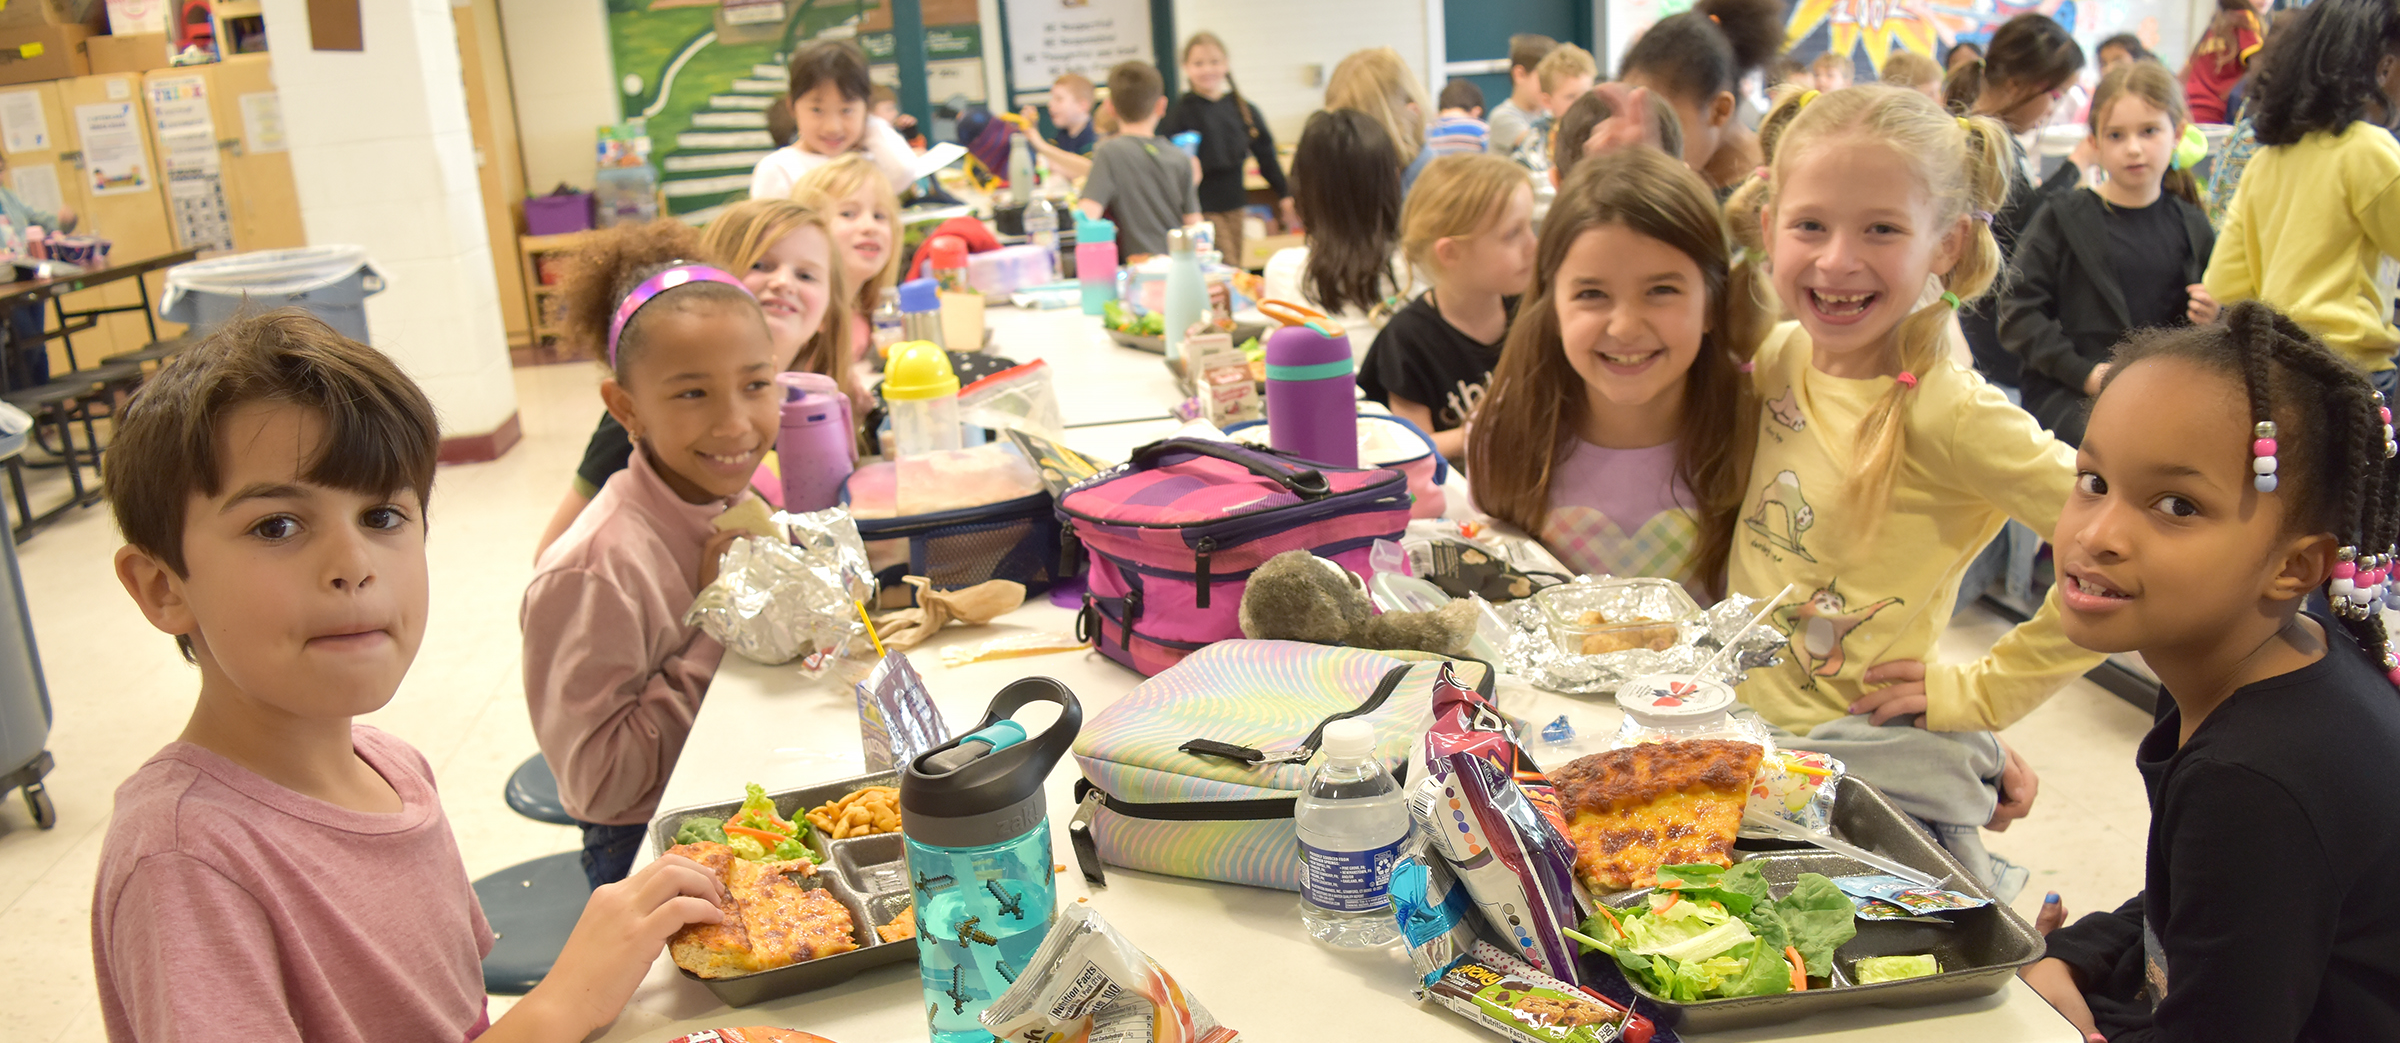 Students at Rydal Elementary School enjoy lunch with classmates.